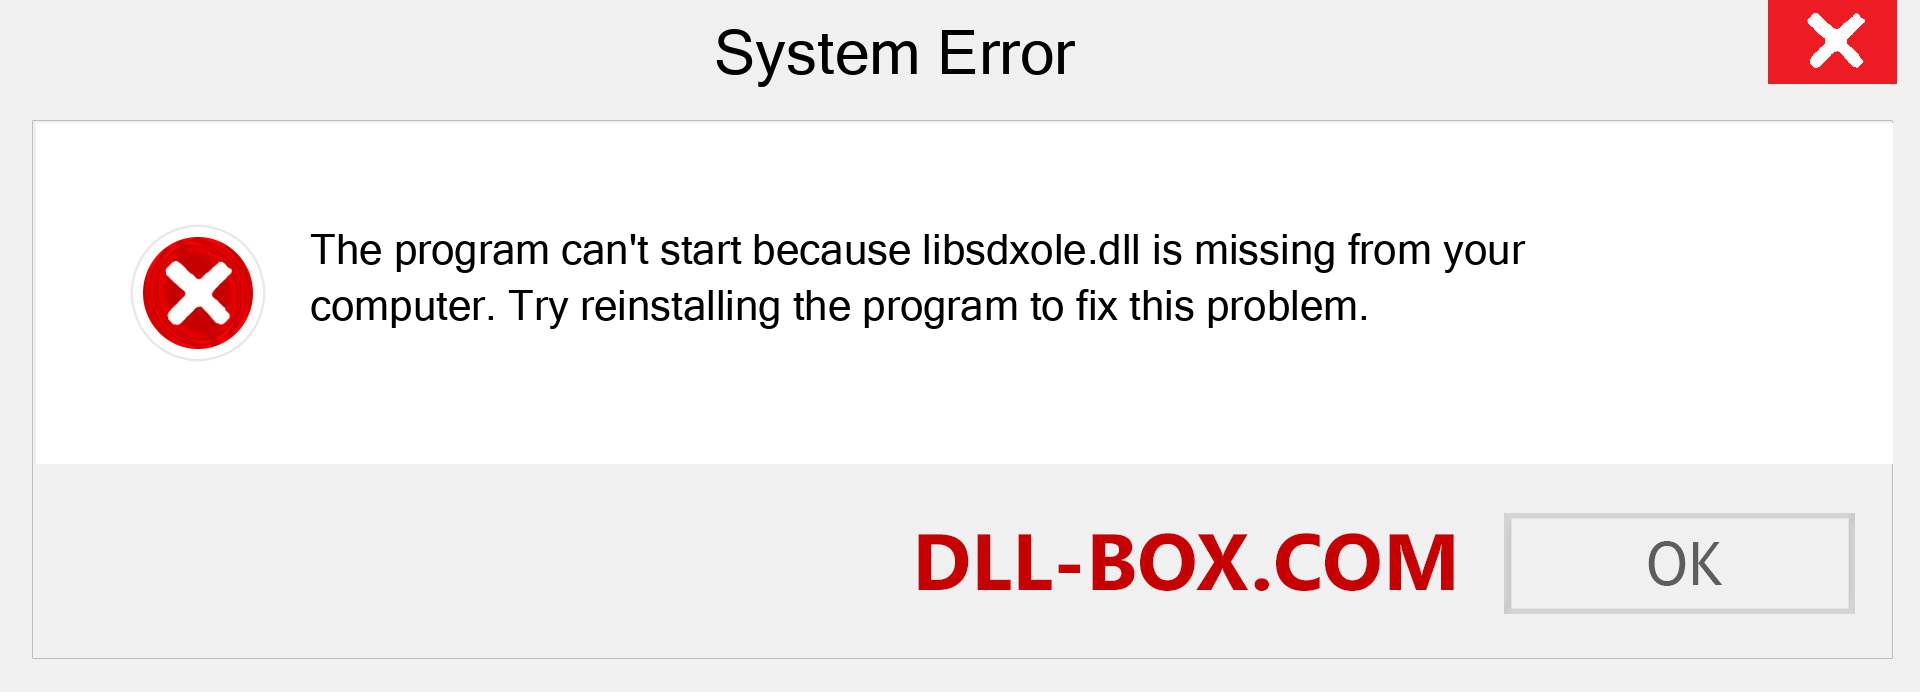  libsdxole.dll file is missing?. Download for Windows 7, 8, 10 - Fix  libsdxole dll Missing Error on Windows, photos, images